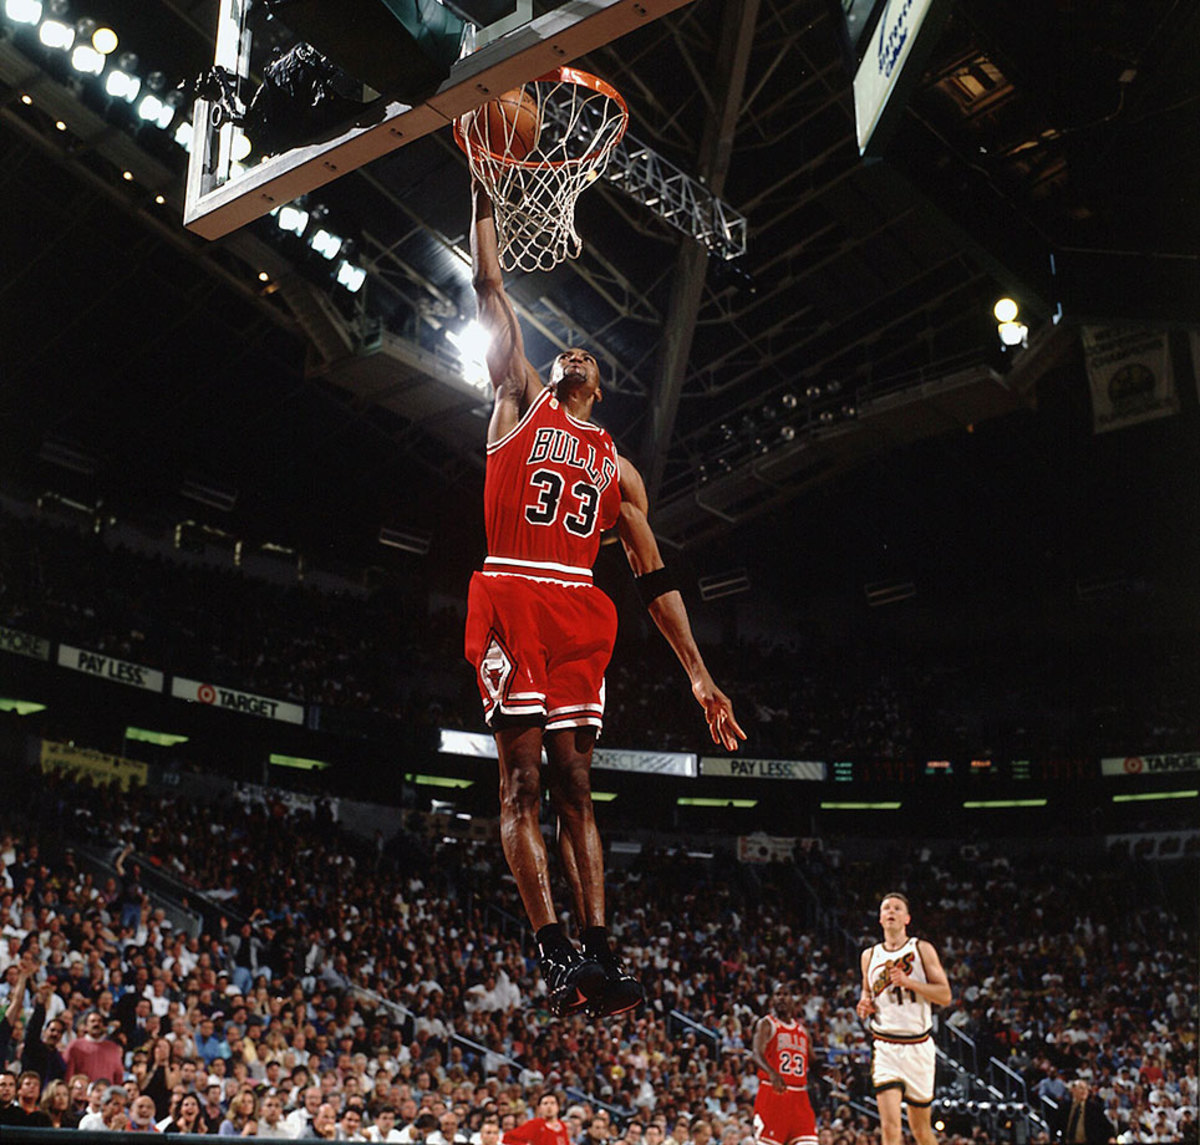 1995-96 Chicago Bulls SI's Best Photos - Sports Illustrated